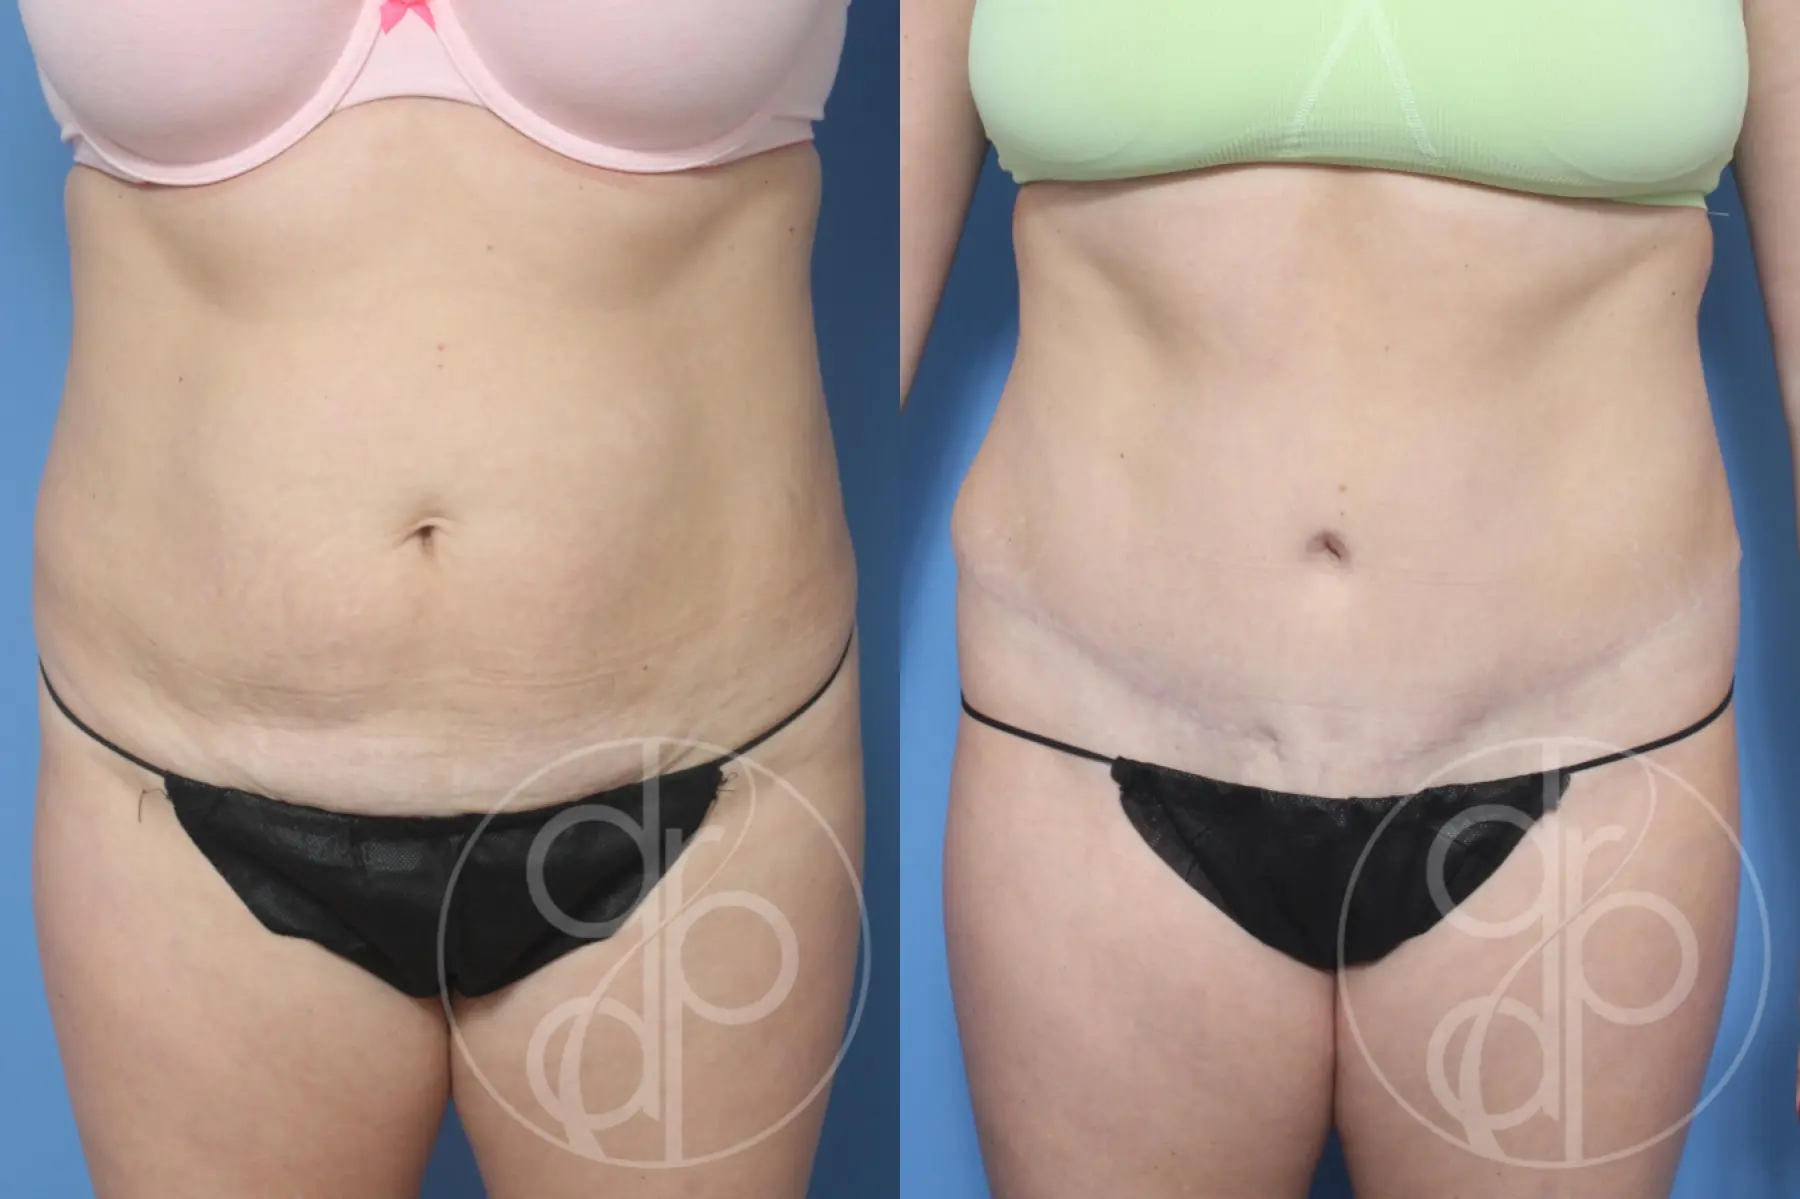 patient 13144 tummy tuck before and after result - Before and After 1